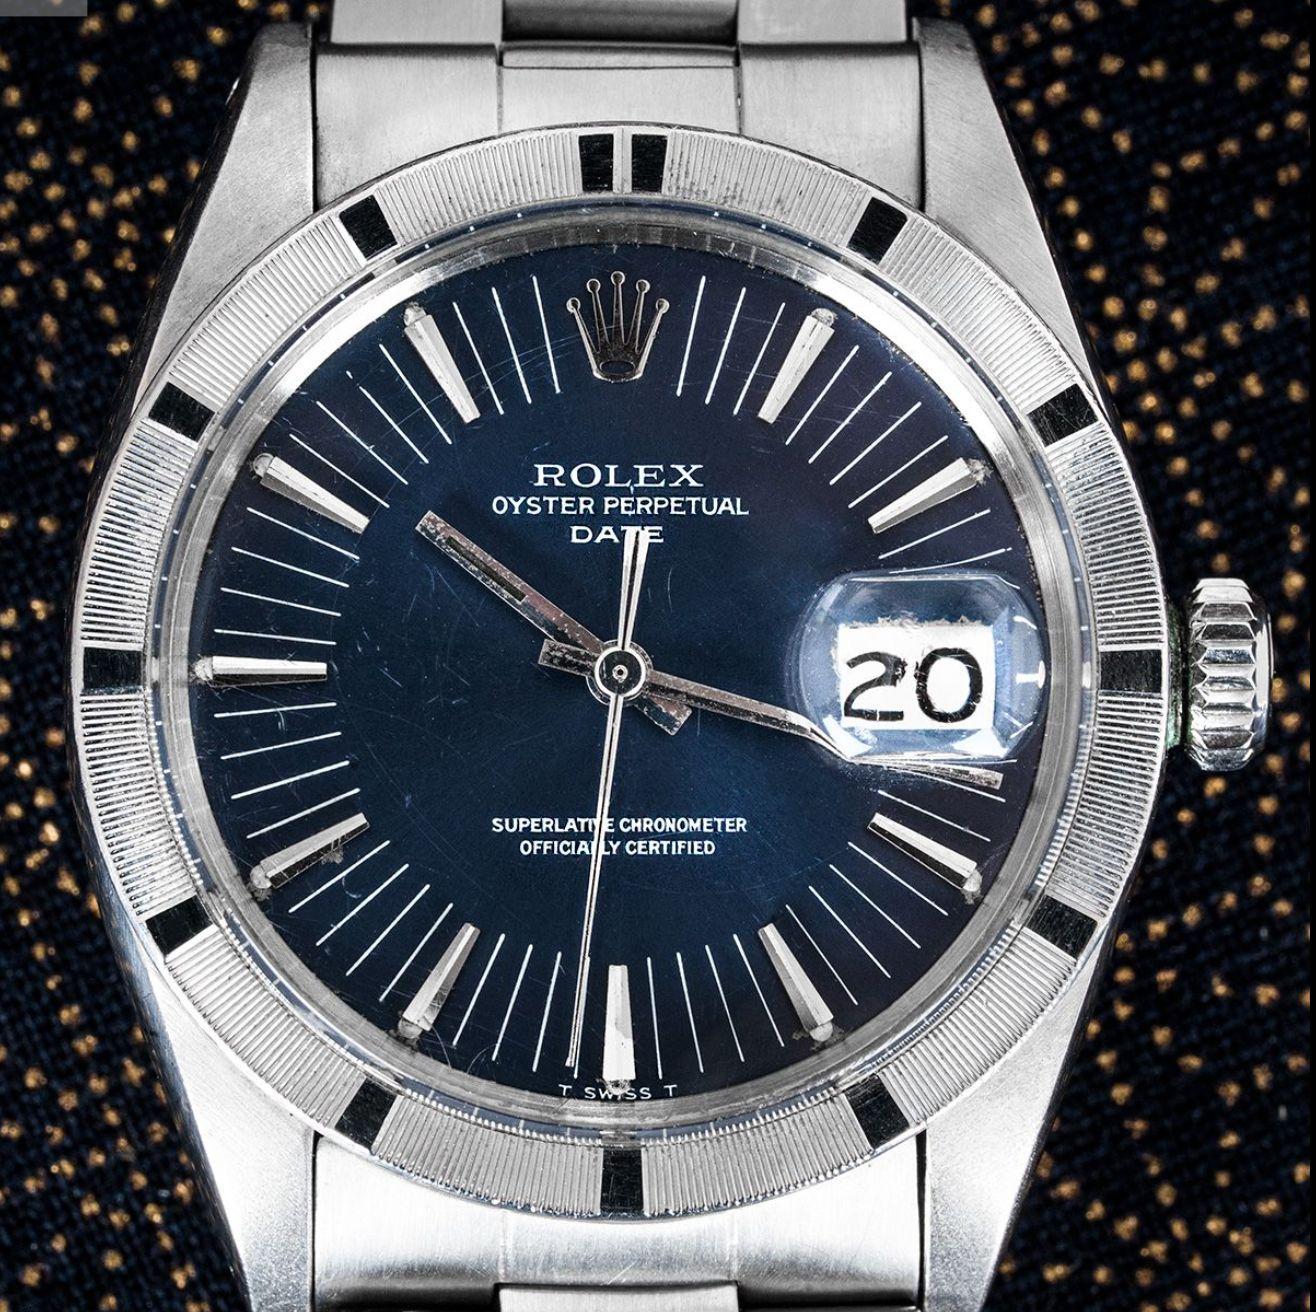 A 34mm stainless steel Oyster Perpetual Date by Rolex. Featuring a blue dial with applied hour markers and a steel engine-turned bezel. Fitted with a plastic glass, a self-winding automatic movement and a stainless steel Oyster bracelet equipped